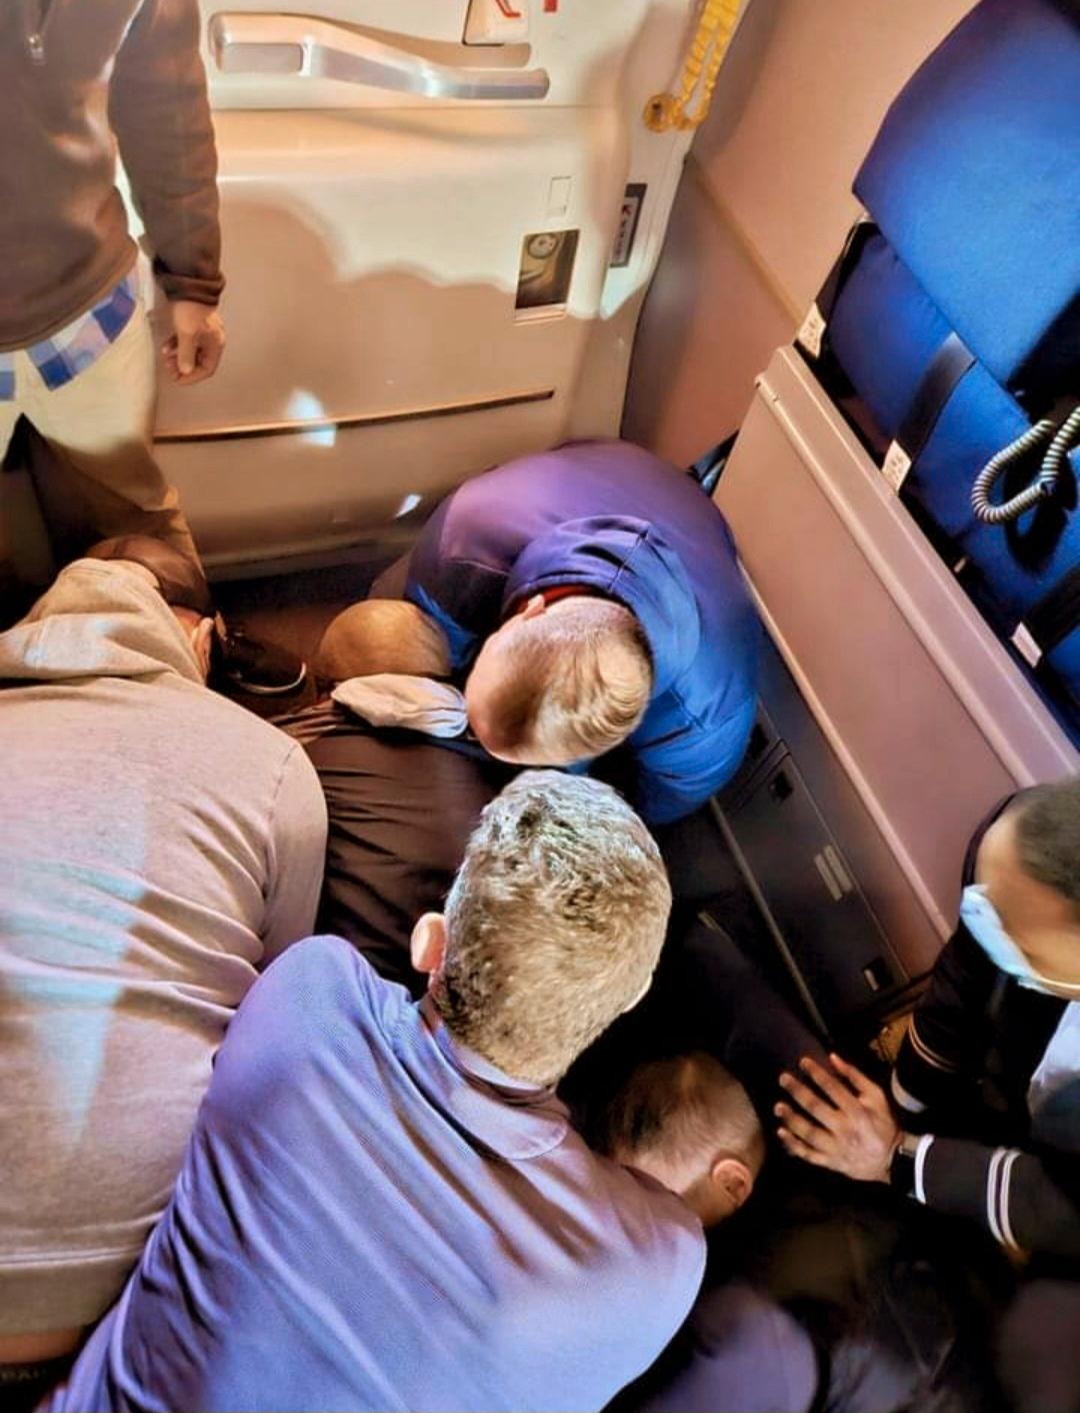 A frenzied man stopped on the plane